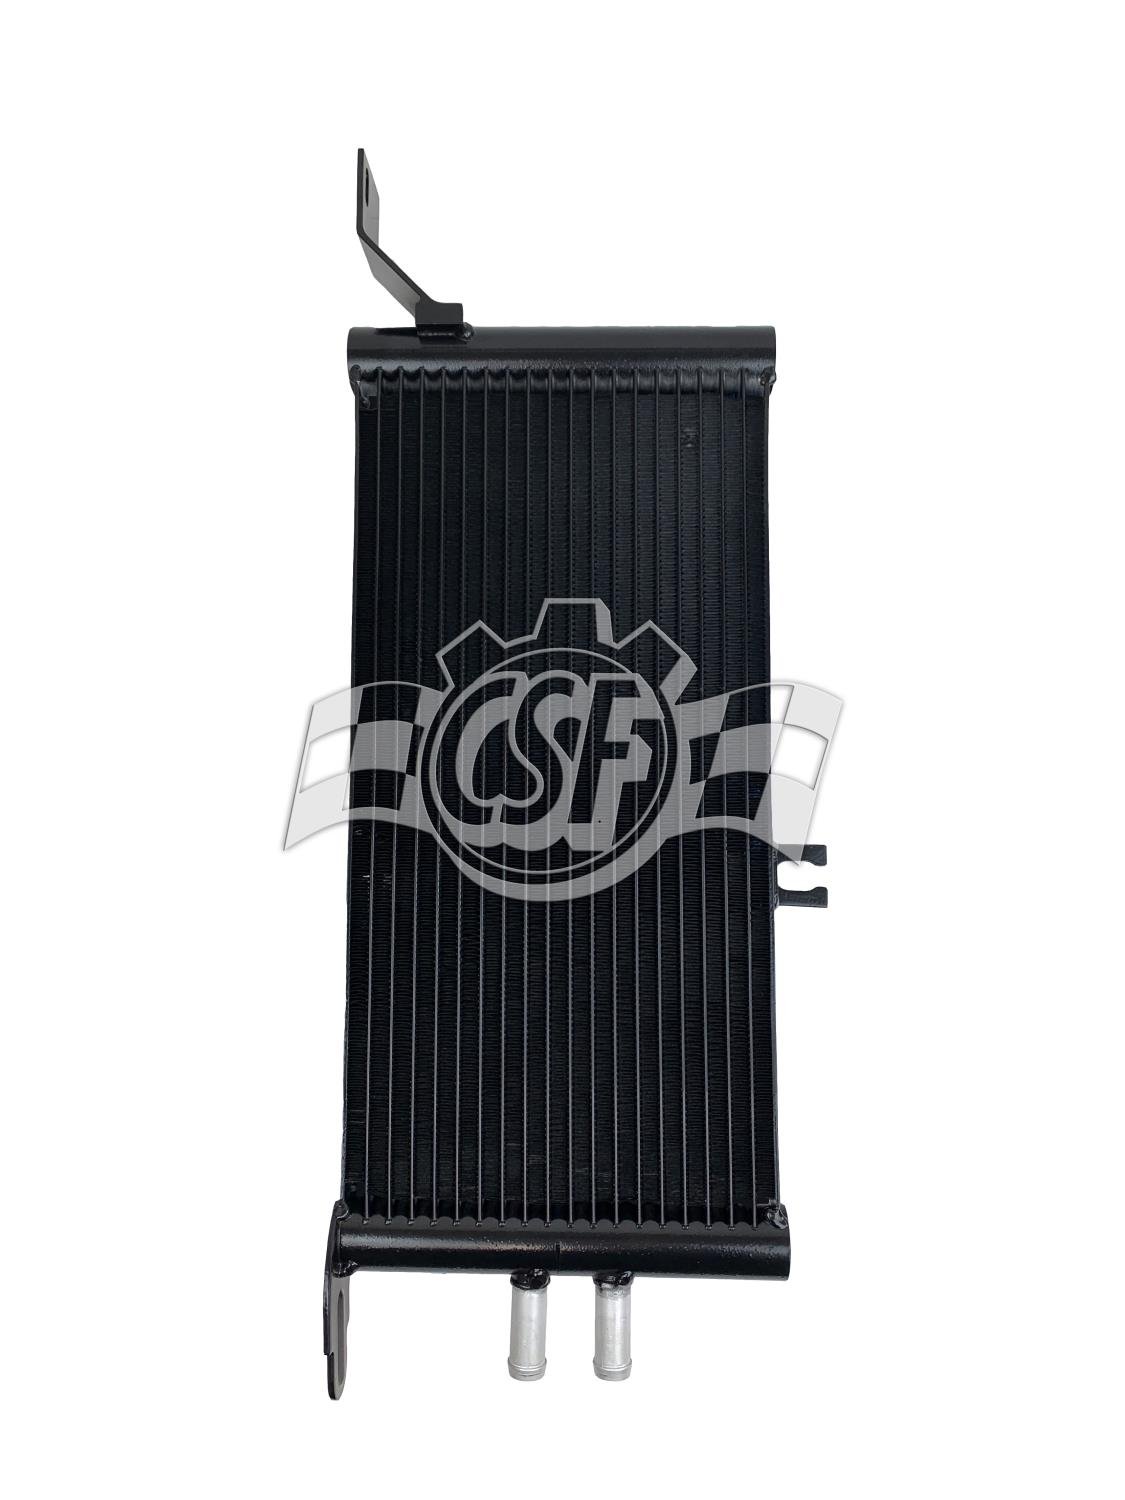 Diesel Fuel Cooler, Ford F-350 Super Duty , Ford F-250 Super Duty